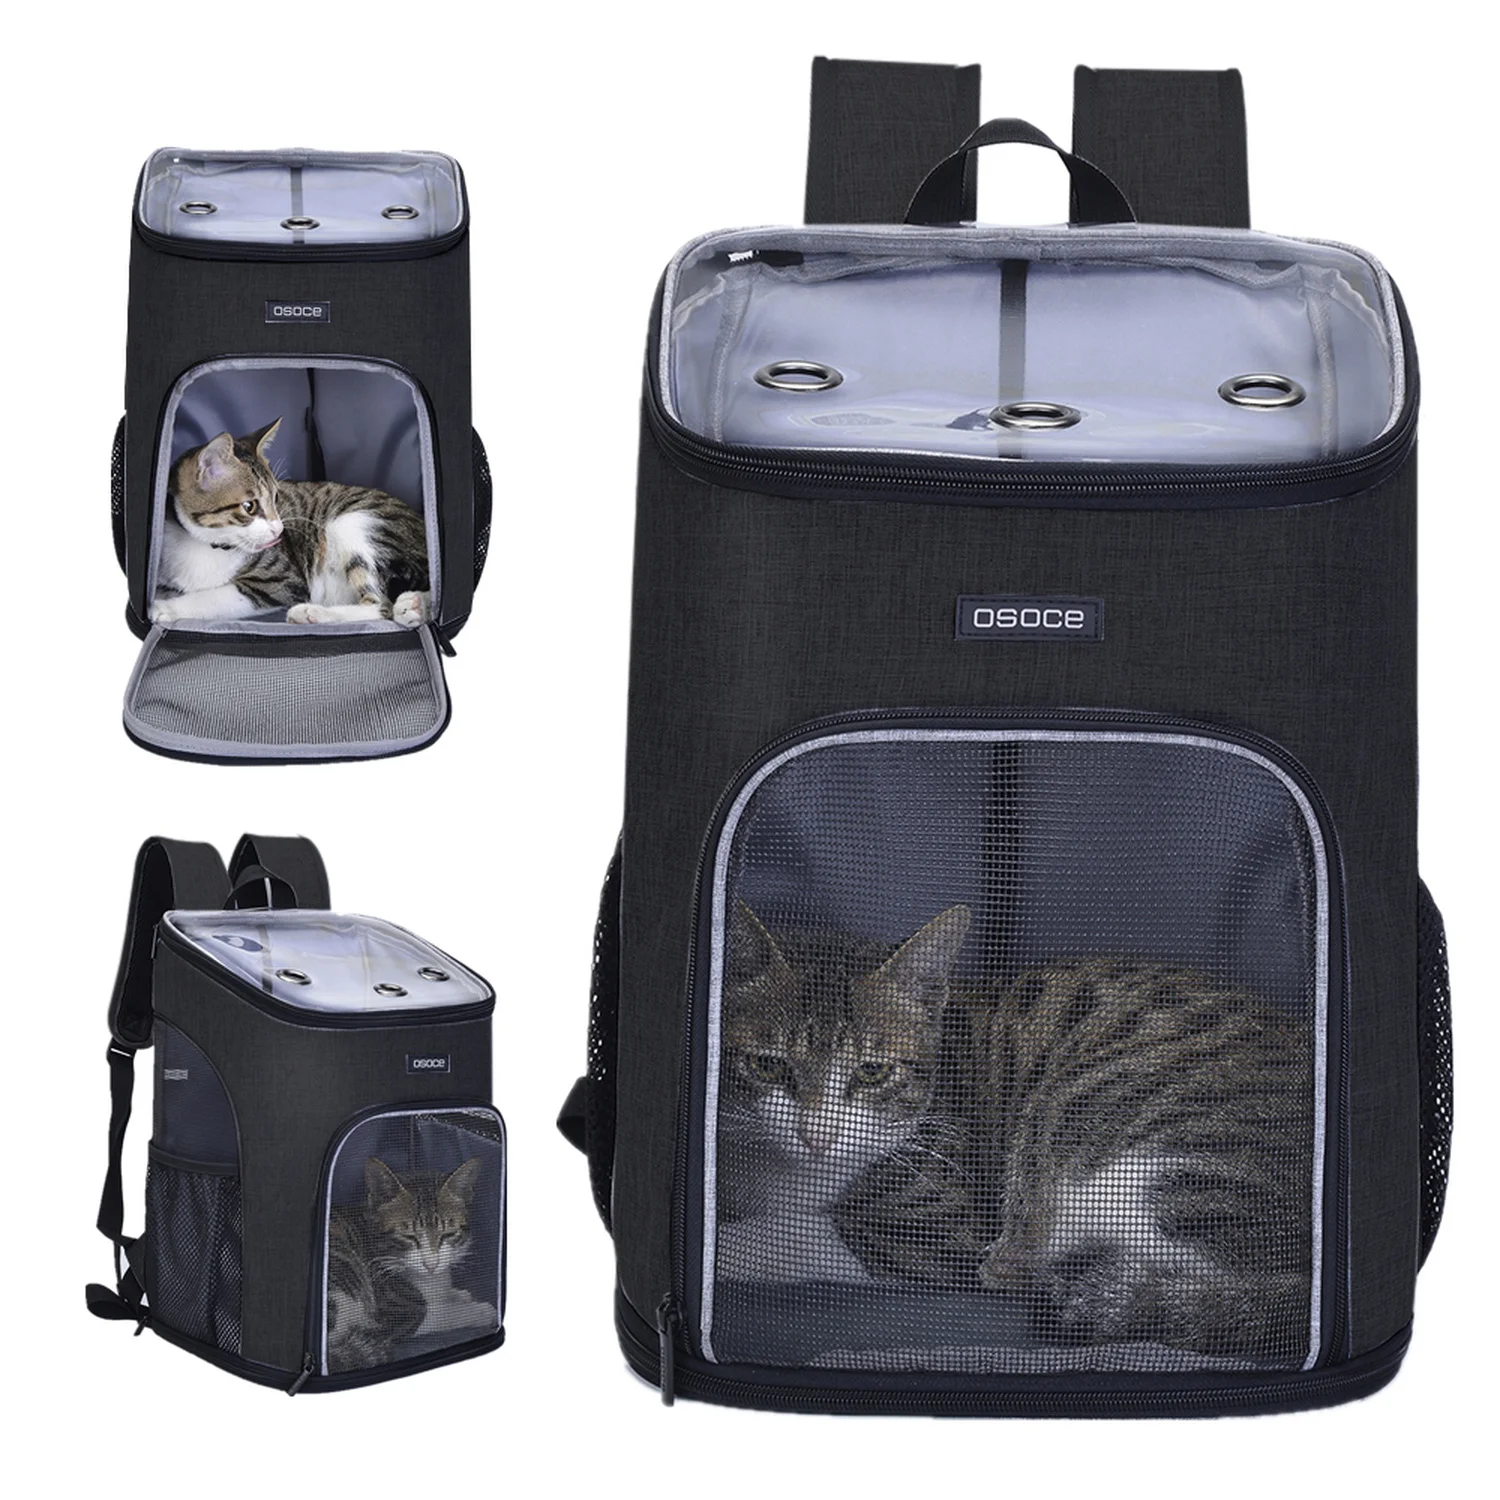 

Large Portable Pets Carrier Comfortable Ventilate Mesh Bags for Cat Outdoor Foldable Backpacks for Puppy Animal Travel Carrying